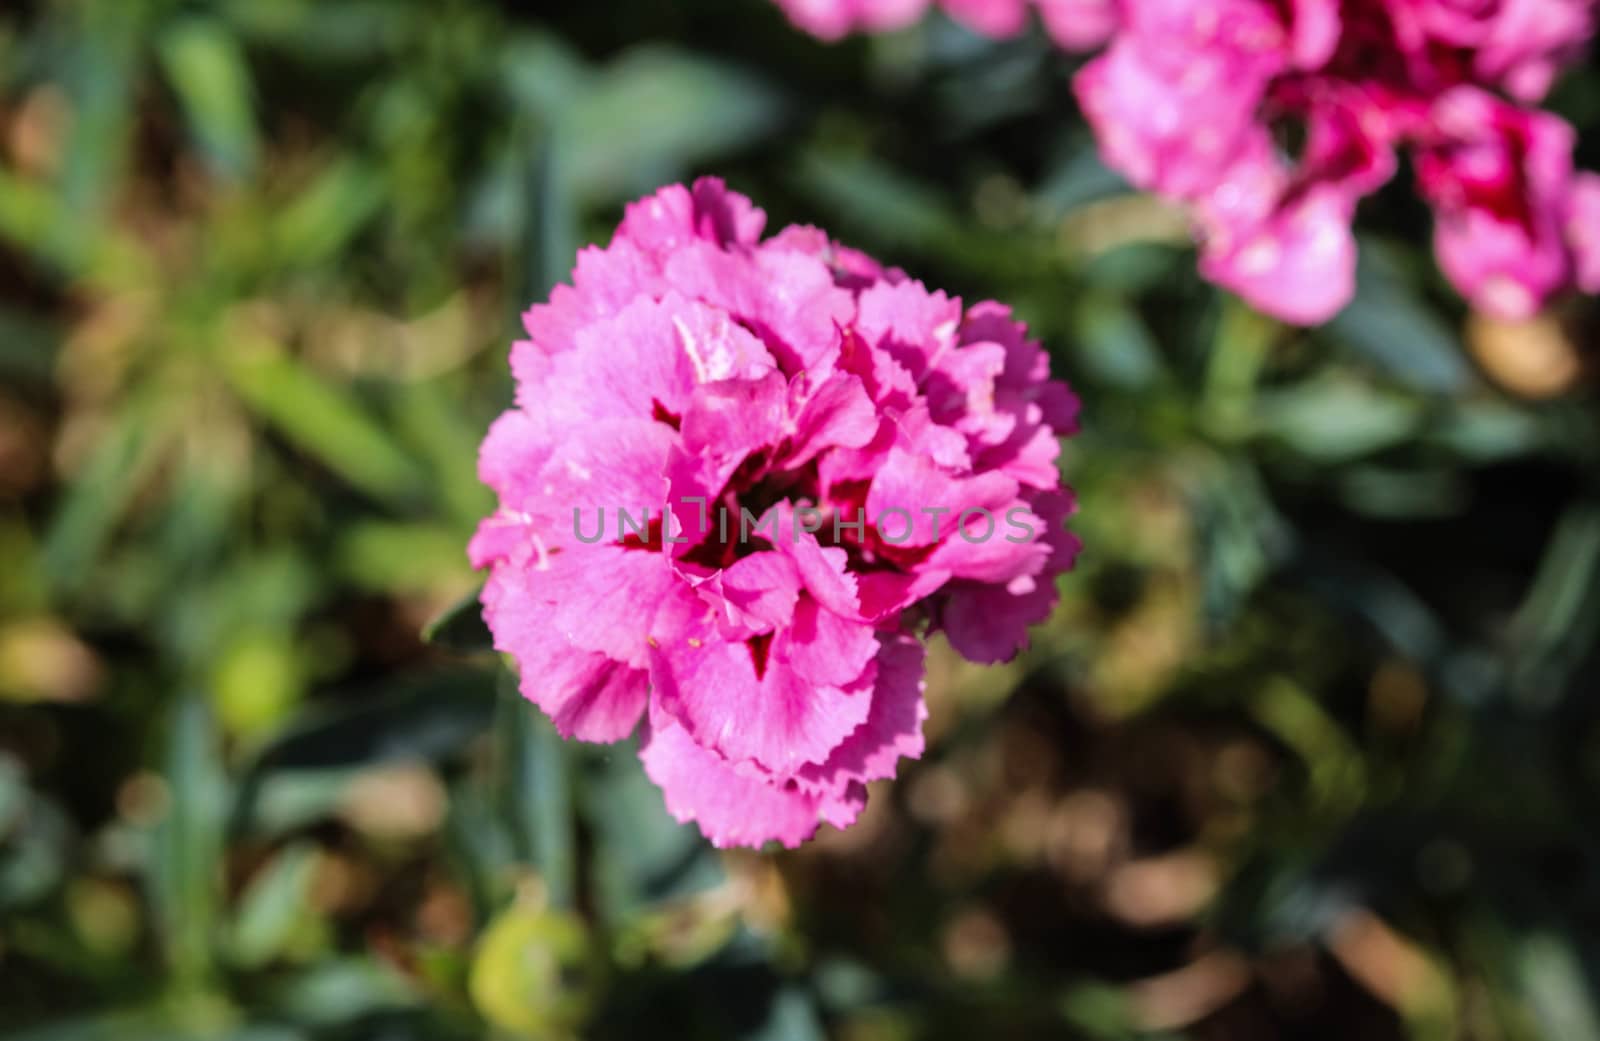 Dianthus caryophyllus, commonly known as the carnation or clove pink, is a species of Dianthus. This flower is blooming in spring in a garden by michaelmeijer